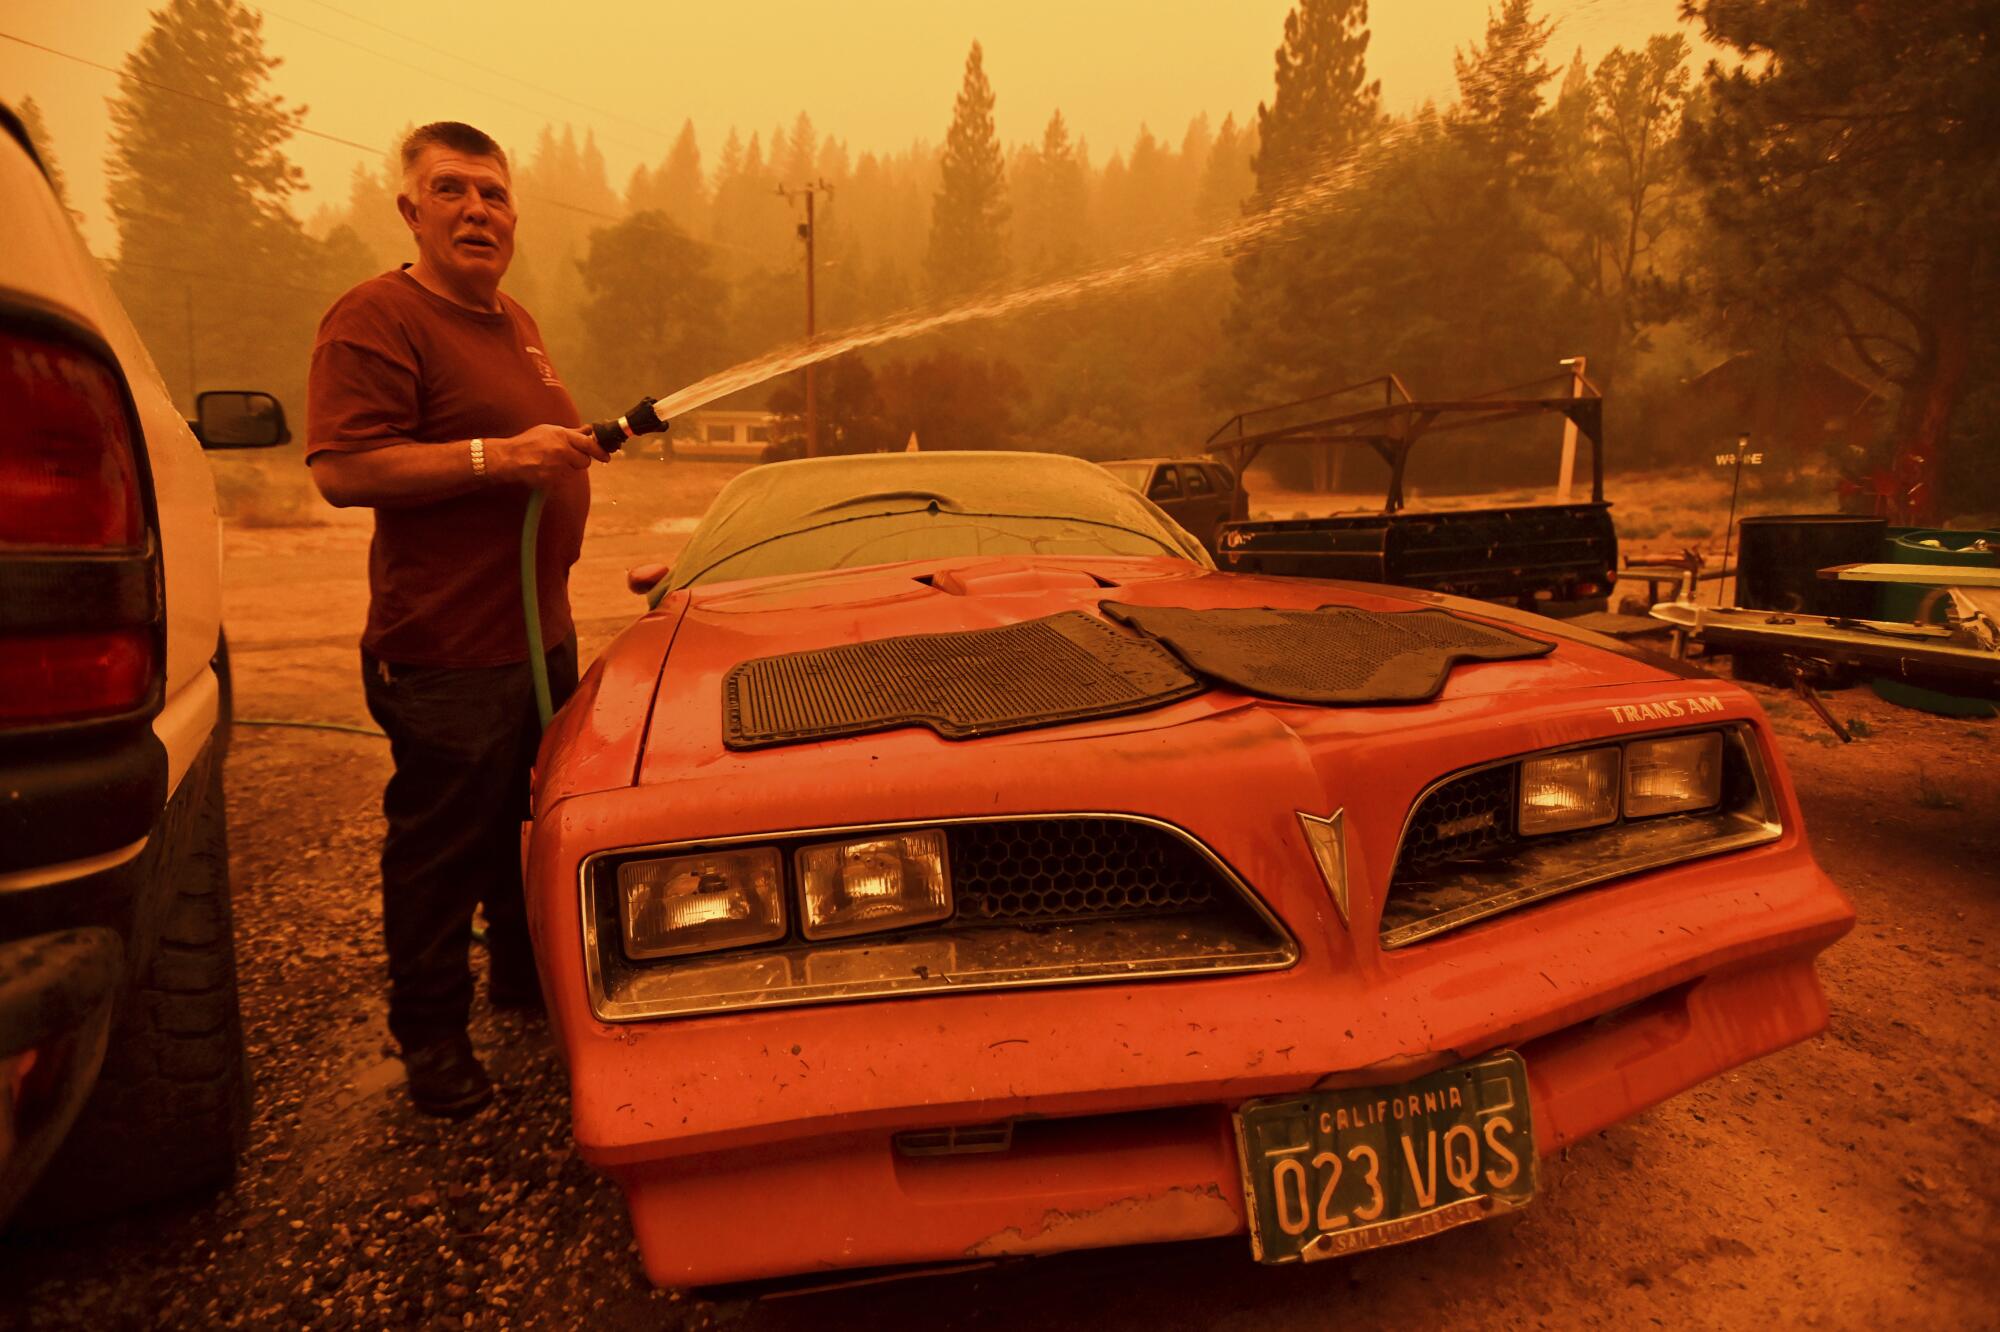 William Deal wets down his 1977 Trans Am as the Dixie fire approaches Crescent Mills in Plumas County, Calif.